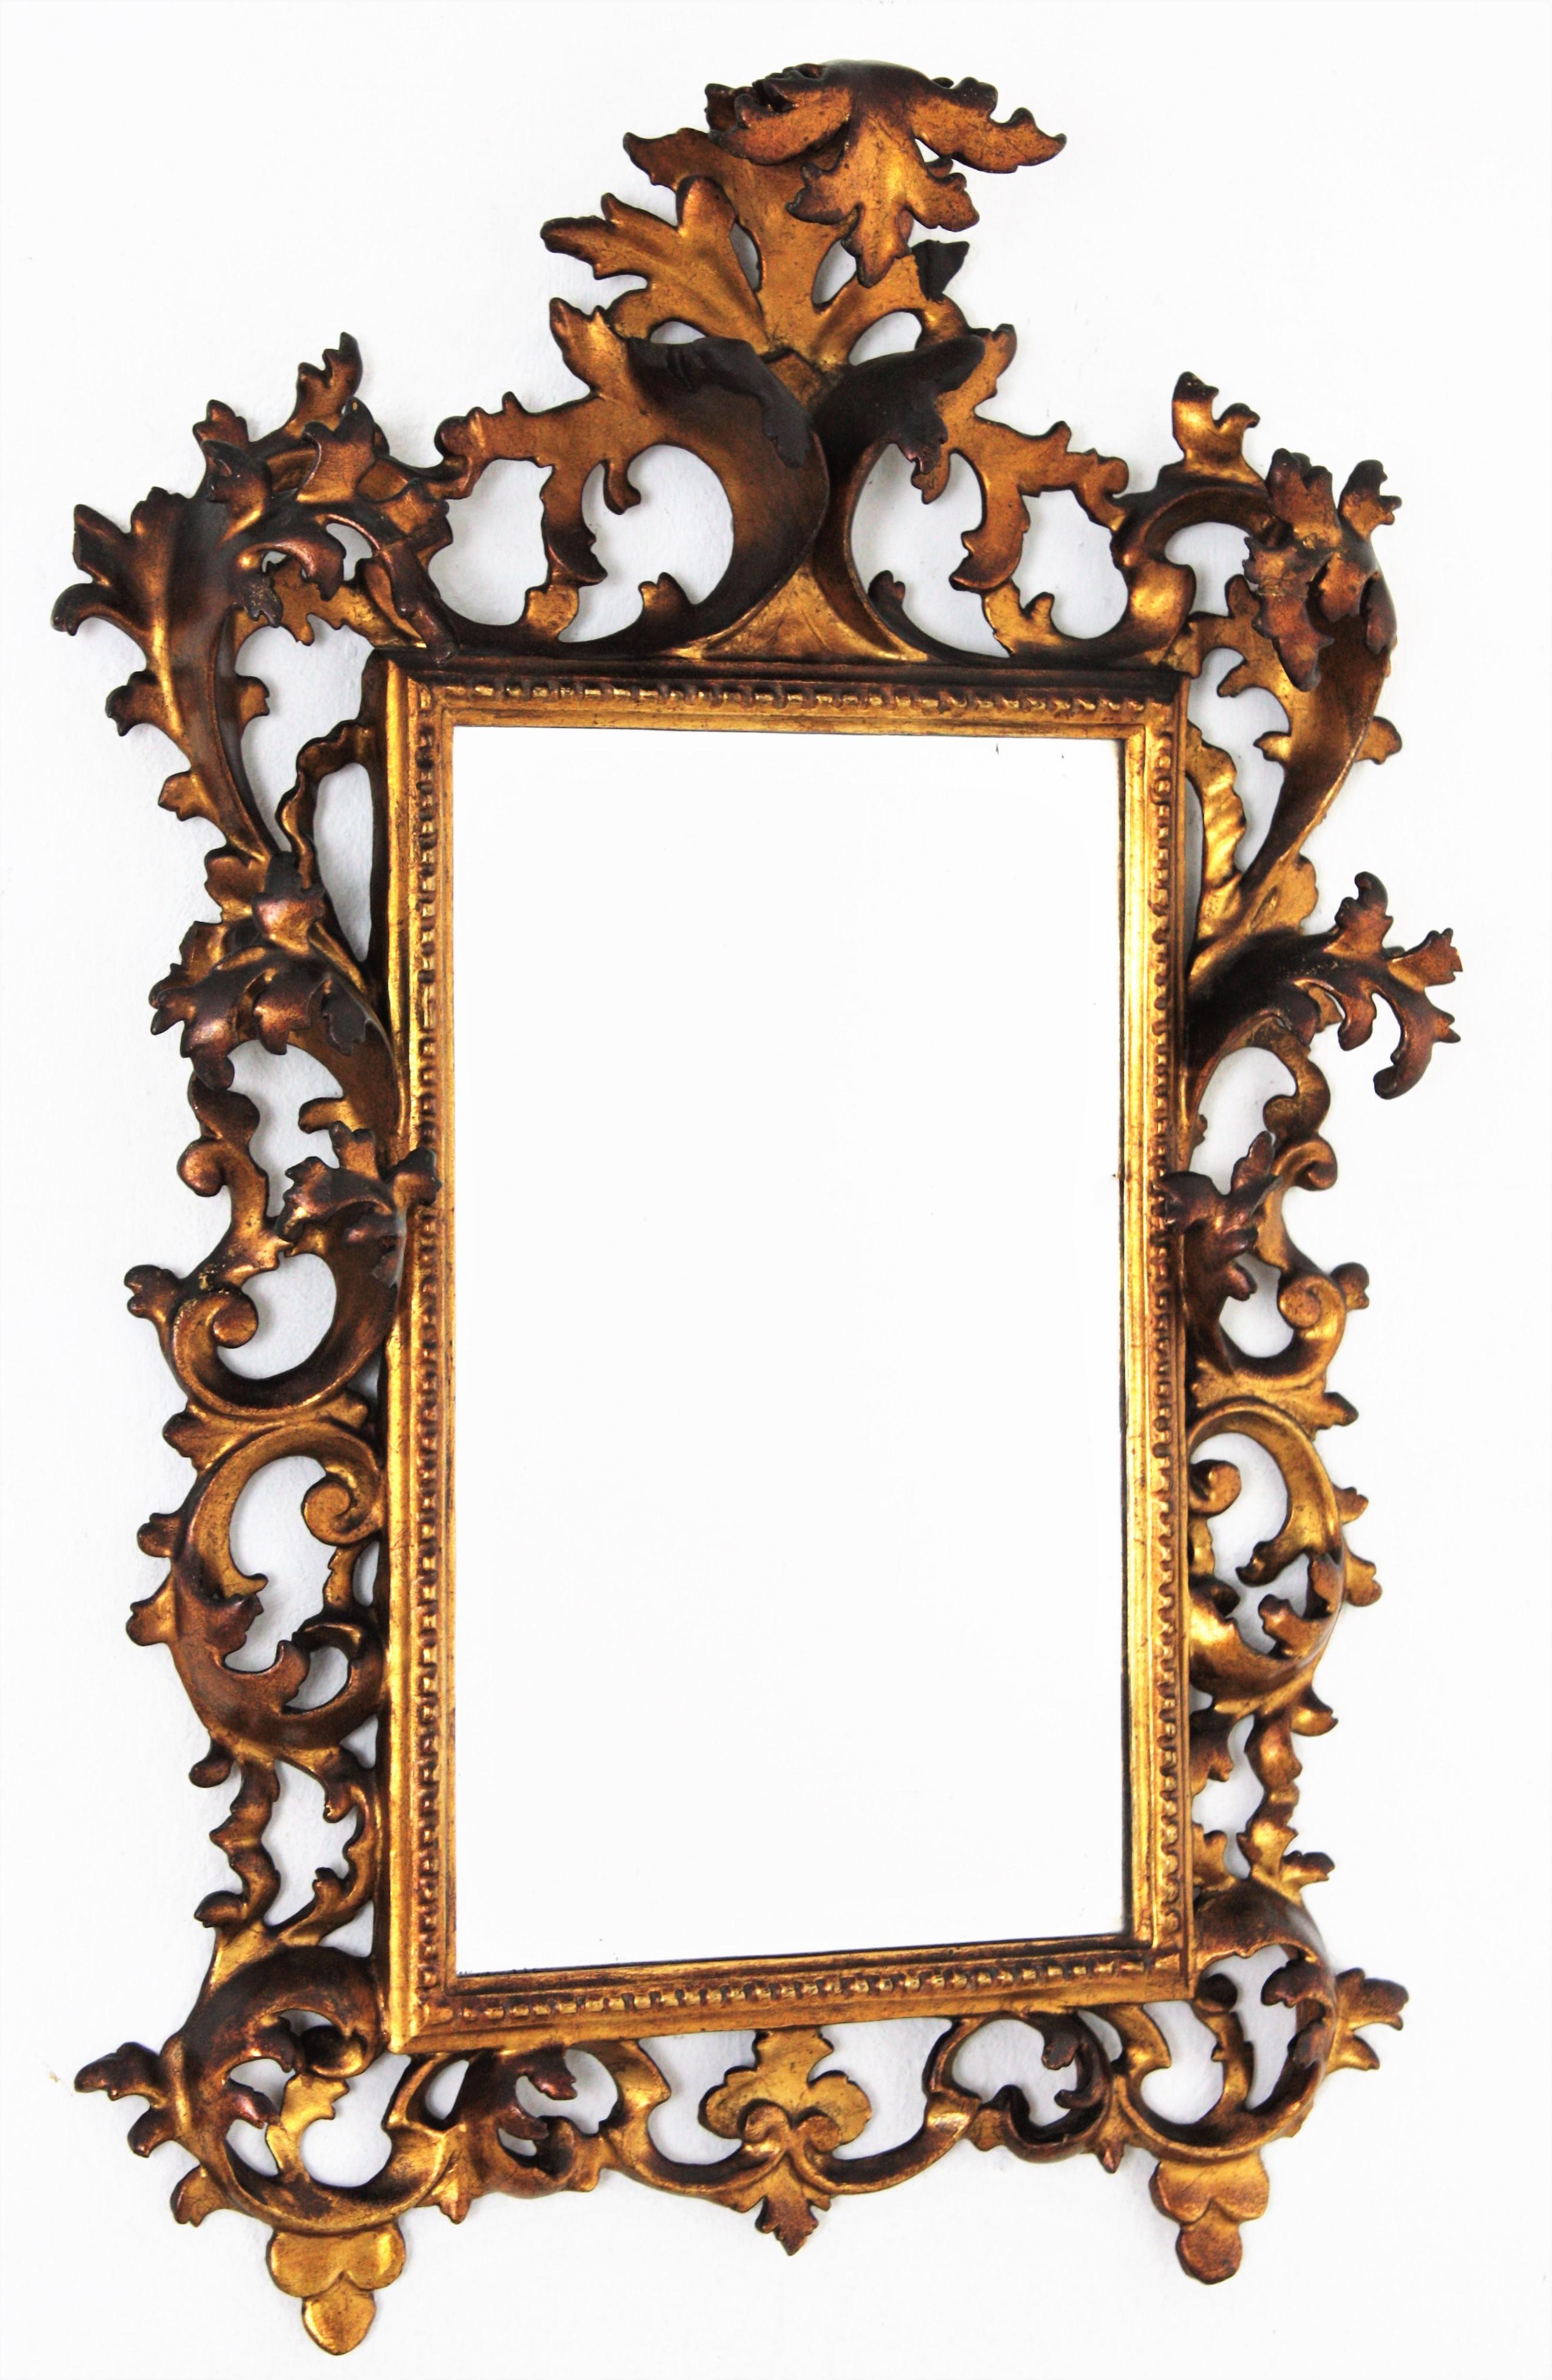 Rococo Revival Early 20th Century Carved Giltwood Rococo Mirror with Crest For Sale